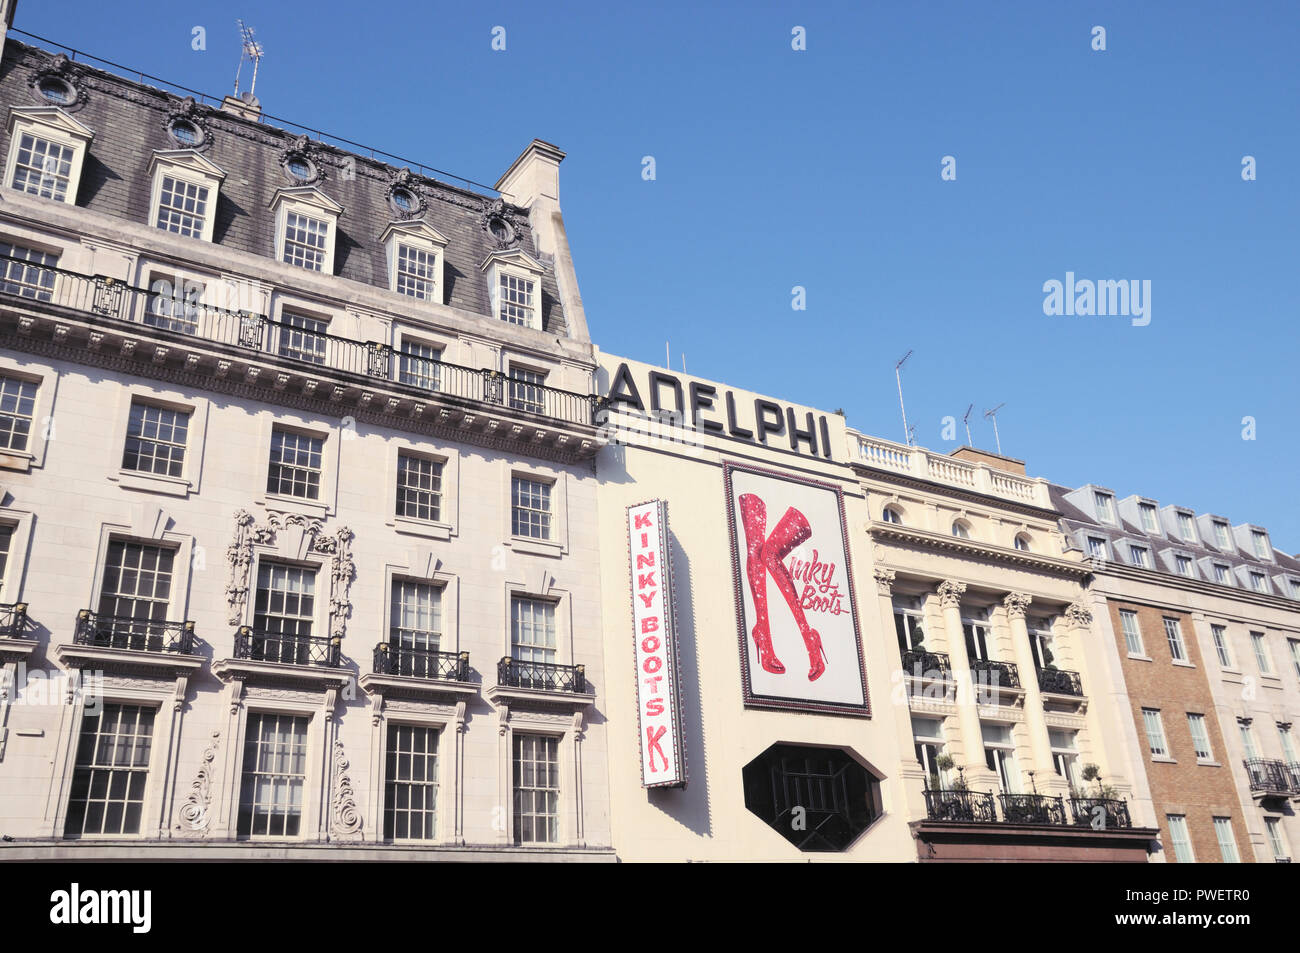 The Adelphi Theatre on The Strand playing hit musical production Kinky Boots, London, England, UK Stock Photo